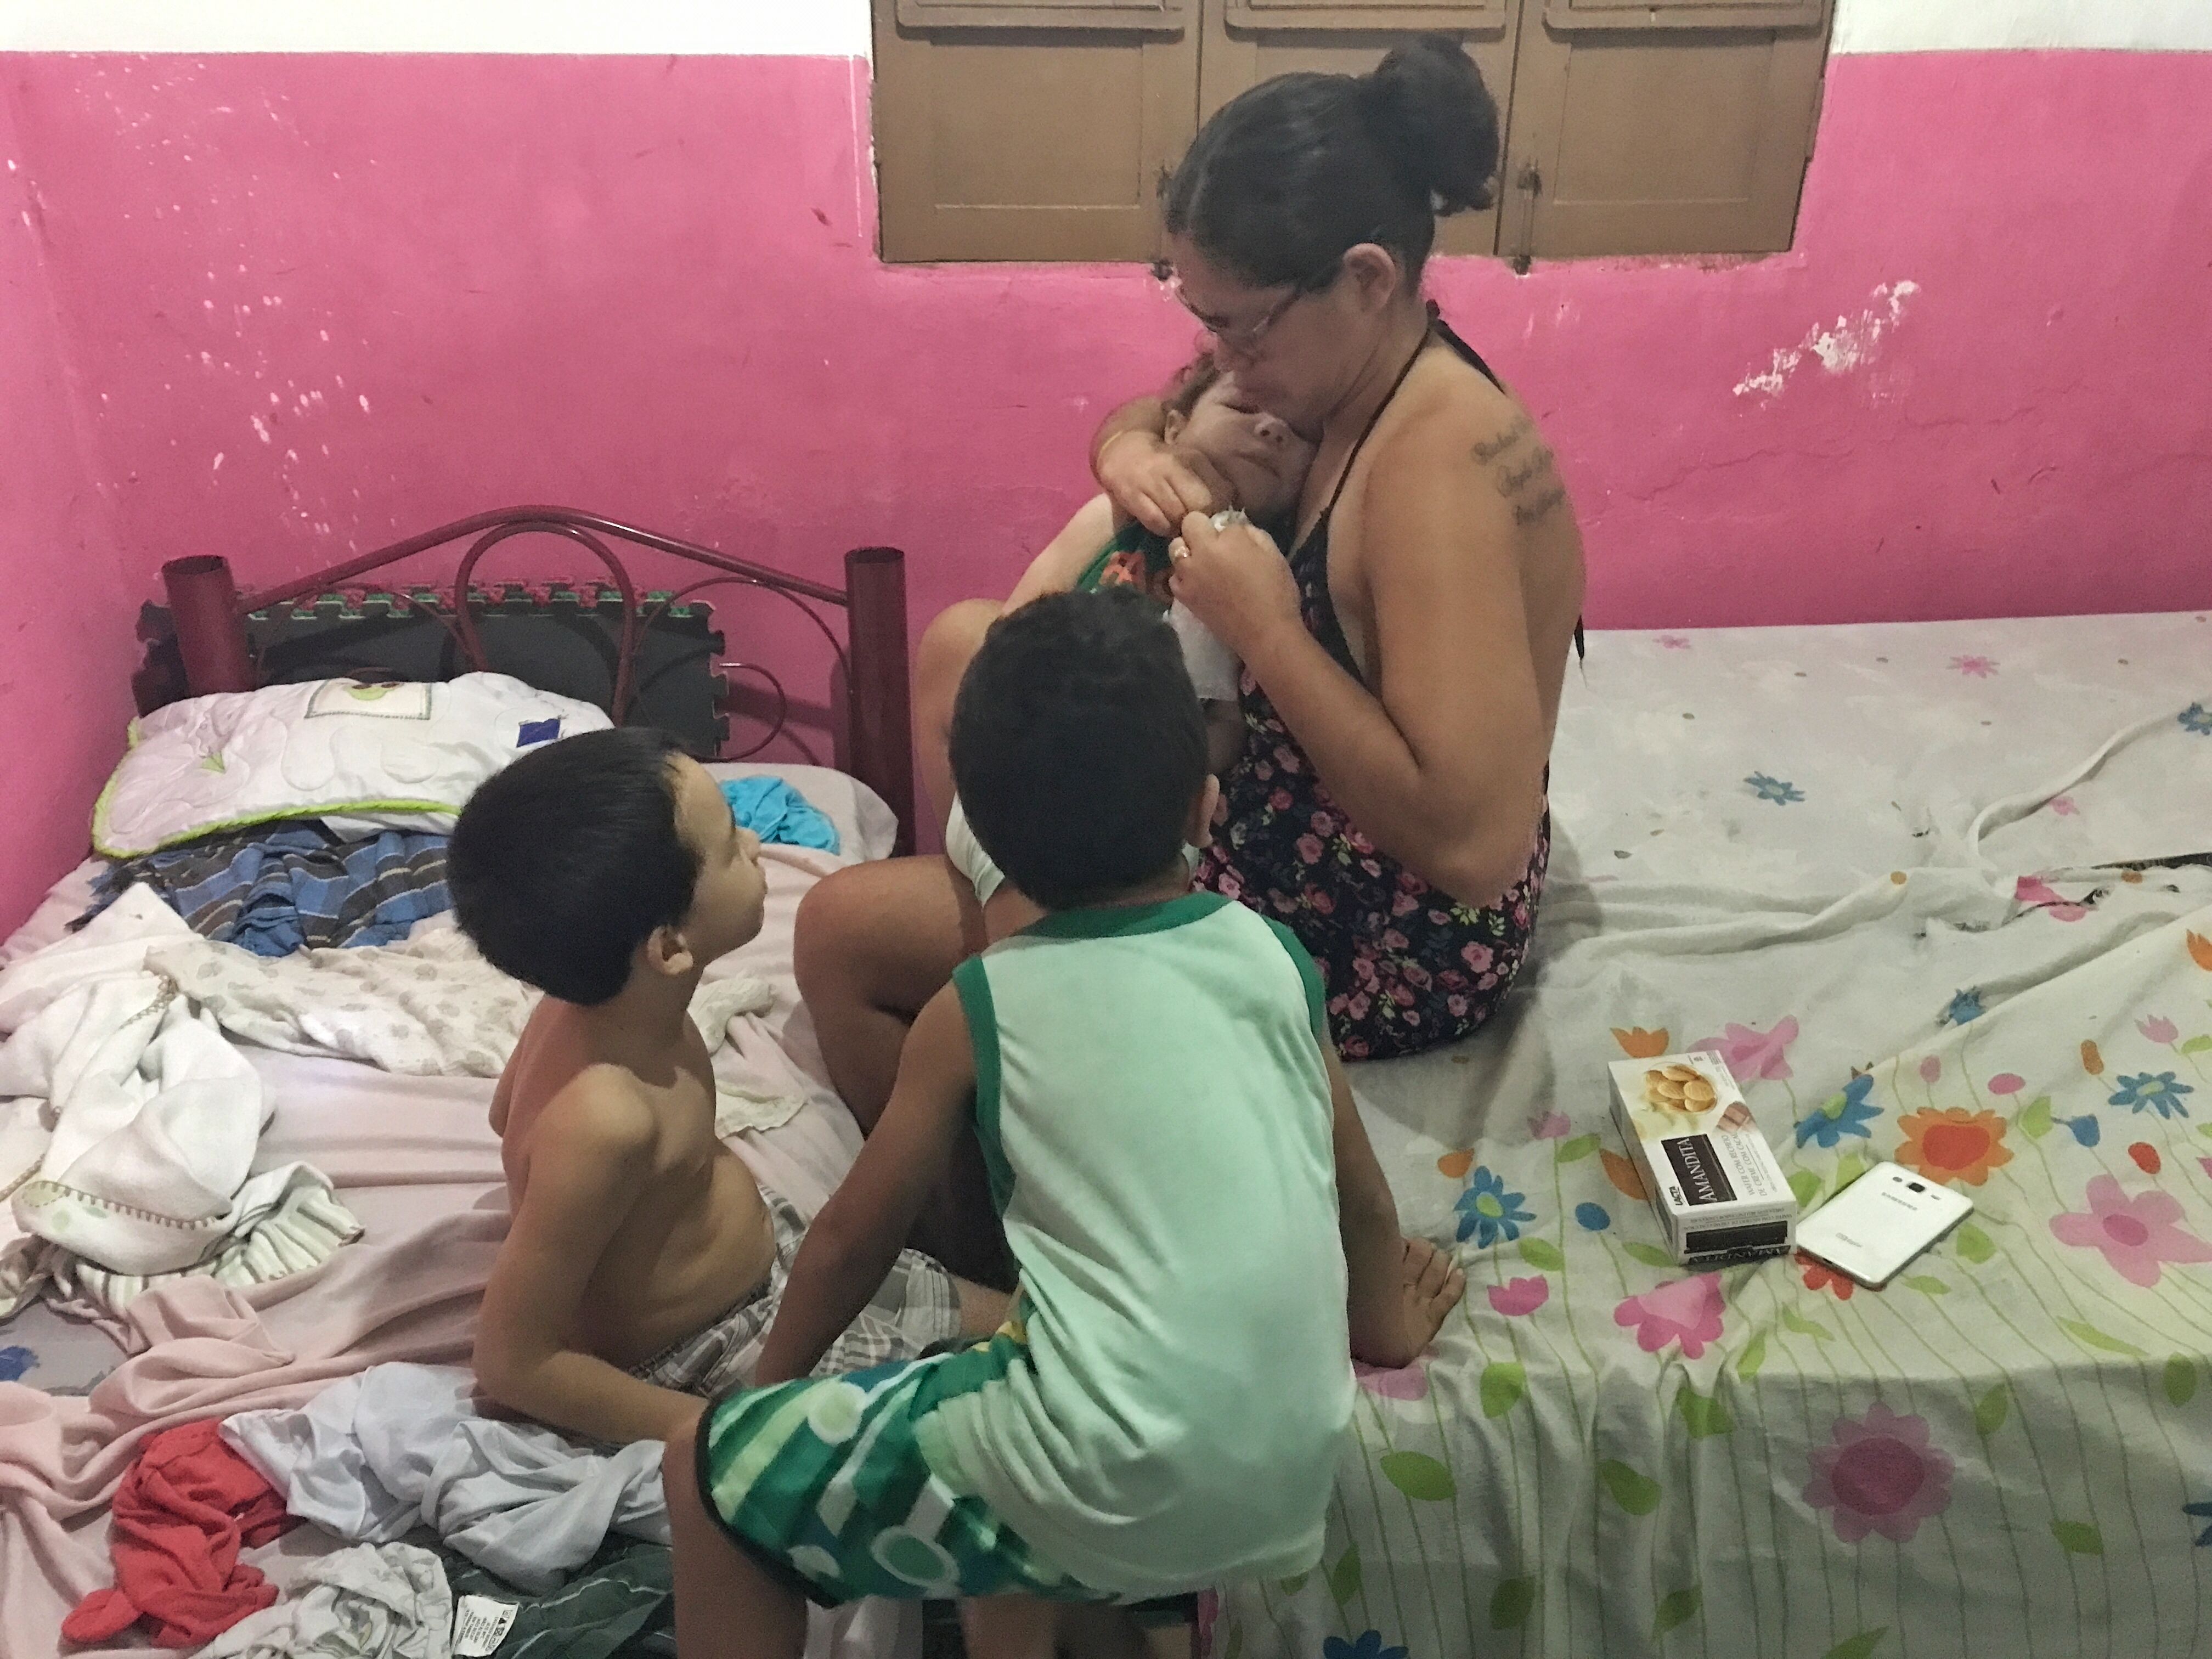 Mylene Helena dos Santos Ferreira, 23, opens a package of chocolate biscuits for her eager sons while balancing Davi in her lap. Davi Herrique Ferreira da Silva was born in August 2015 with congenital Zika syndrome. Shirtless on the twin bed is Mylene’s oldest son, five-year-old Richard Miguel; next to him in the green outfit is Angelo Rafael, age four. When Davi was only a few months old, Mylene left her abusive husband of eight years. He now refuses to acknowledge Davi, but when Davi falls sick, Mylene must send her older sons to stay with him. In July, Mylene was at the hospital with Davi for nearly two weeks while he was treated for a severe respiratory infection. Miguel and Rafael did not see her during this time. “Whenever I talked to them on the phone, they asked when I was coming home,” Mylene said. These pictures were taken the week she and Davi returned from the hospital. Image by Poonam Daryani. Brazil, 2017.